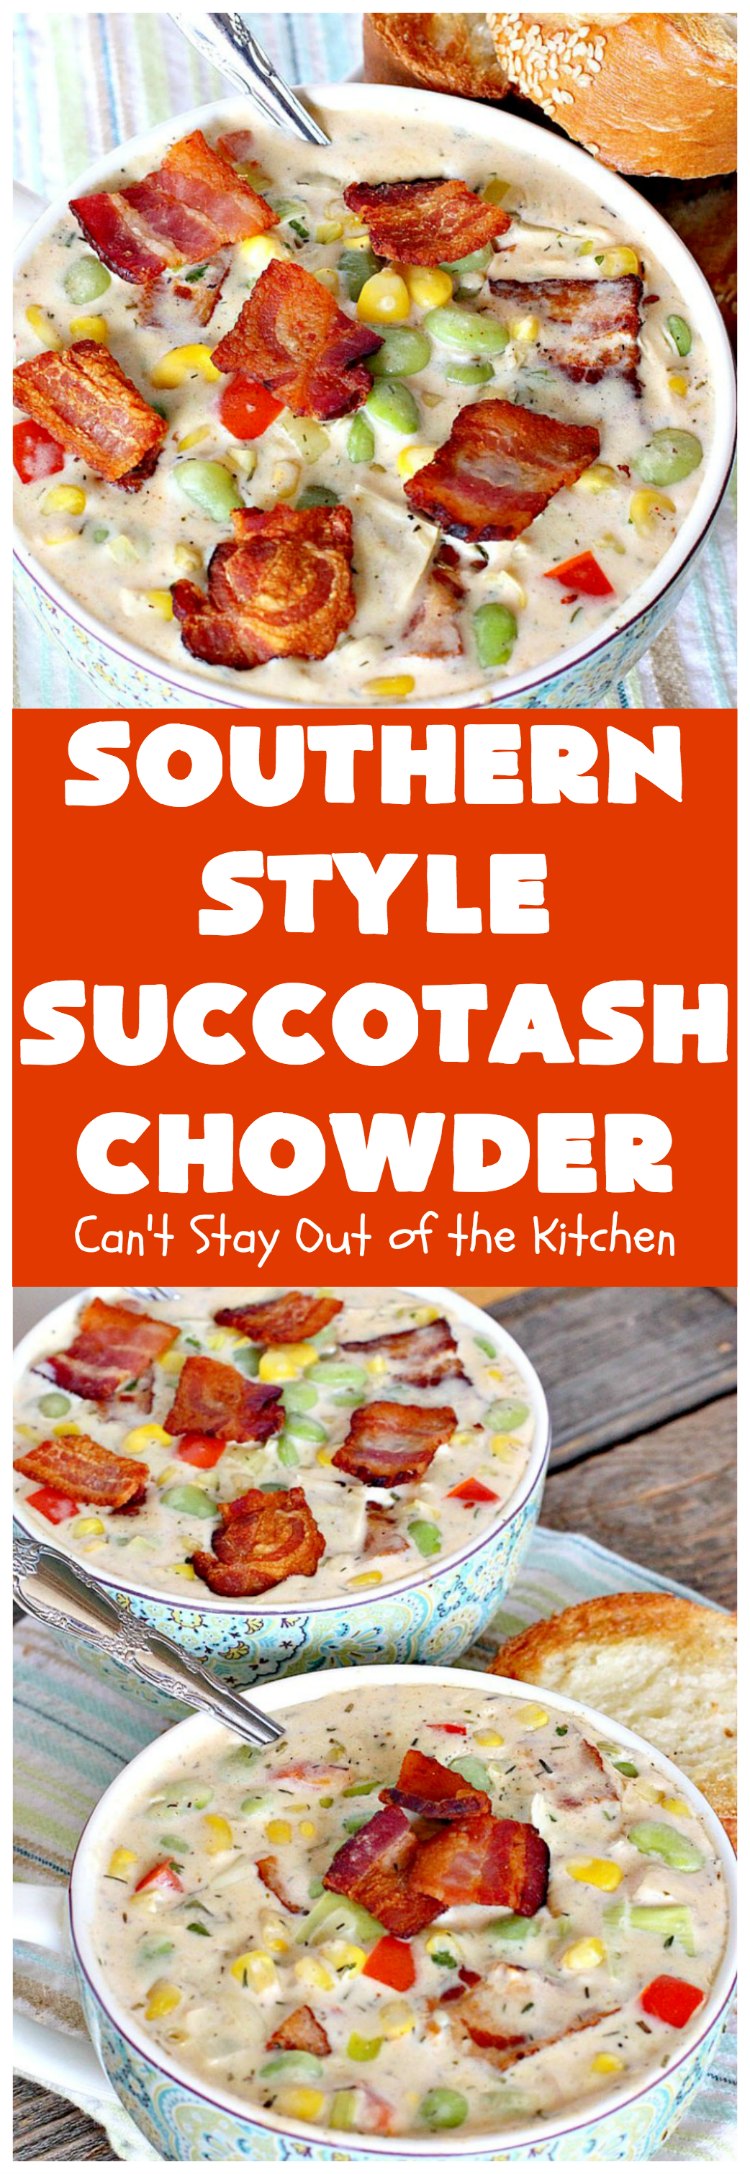 Southern Style Succotash Chowder | Can't Stay Out of the Kitchen